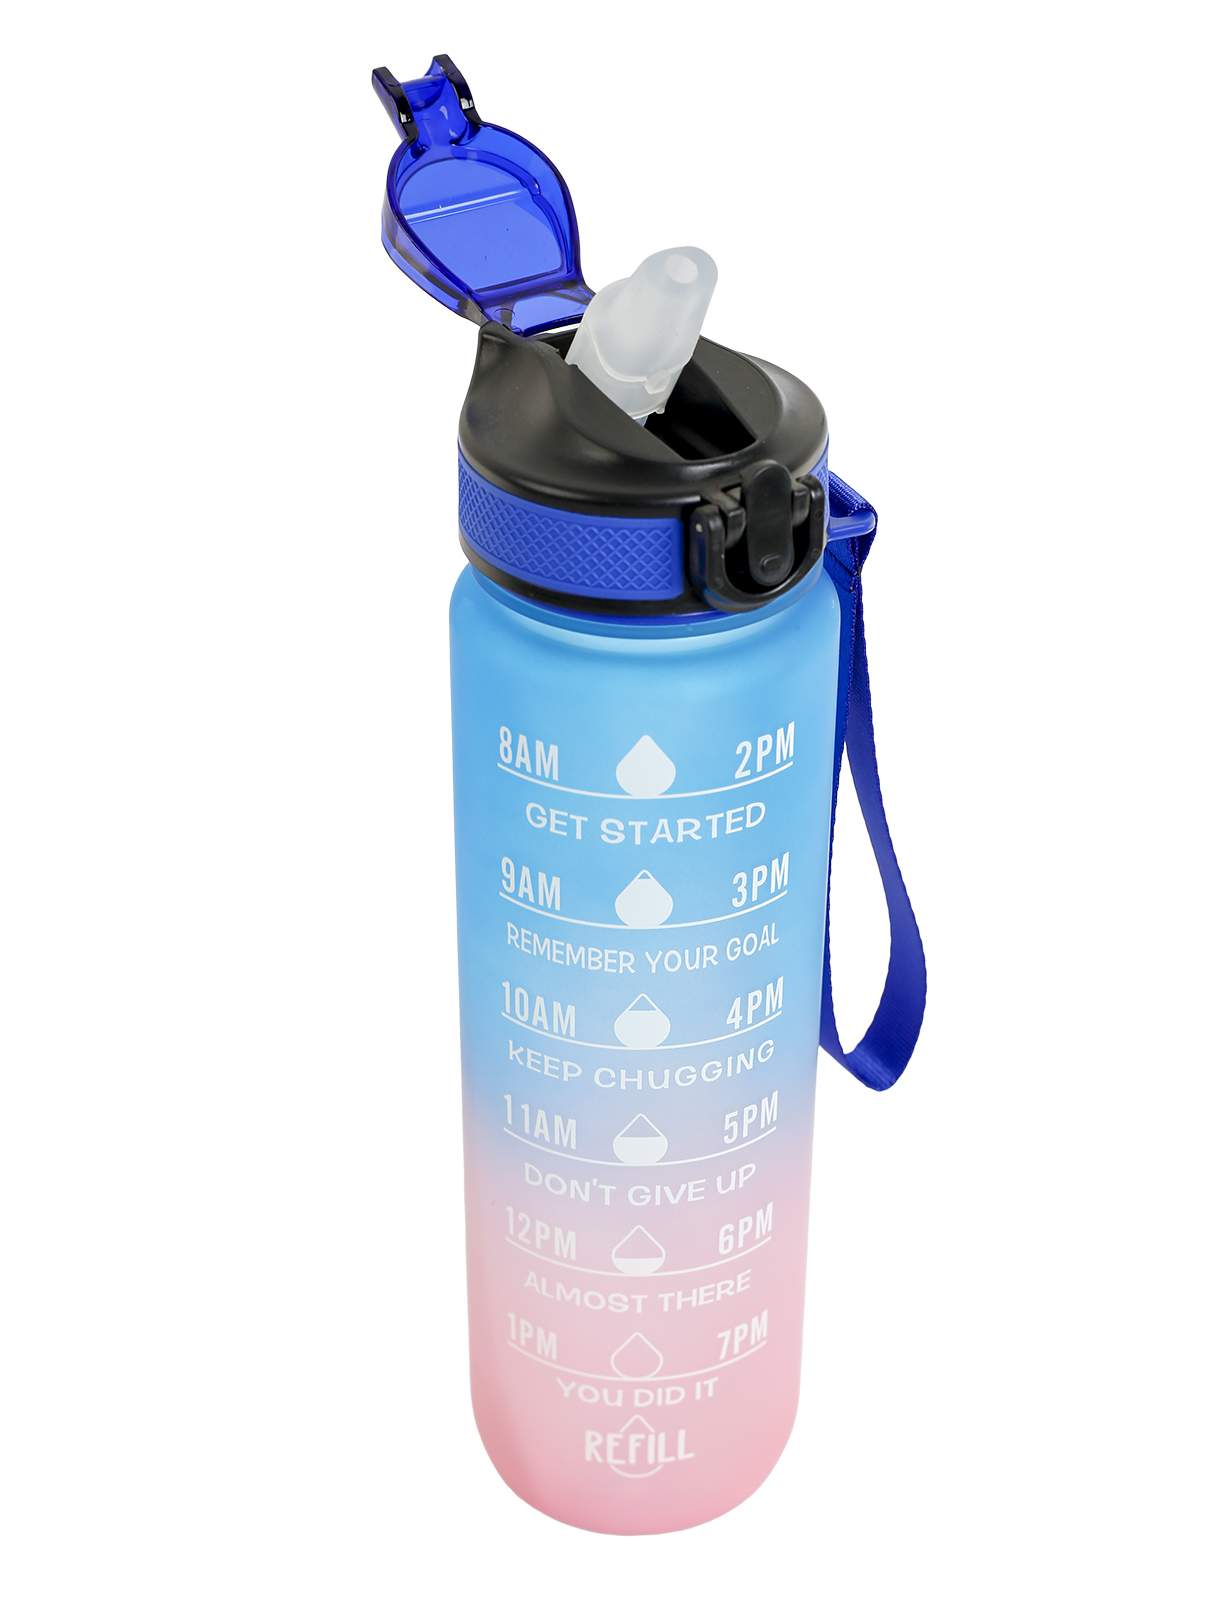 Corrugated color water bottle and timer